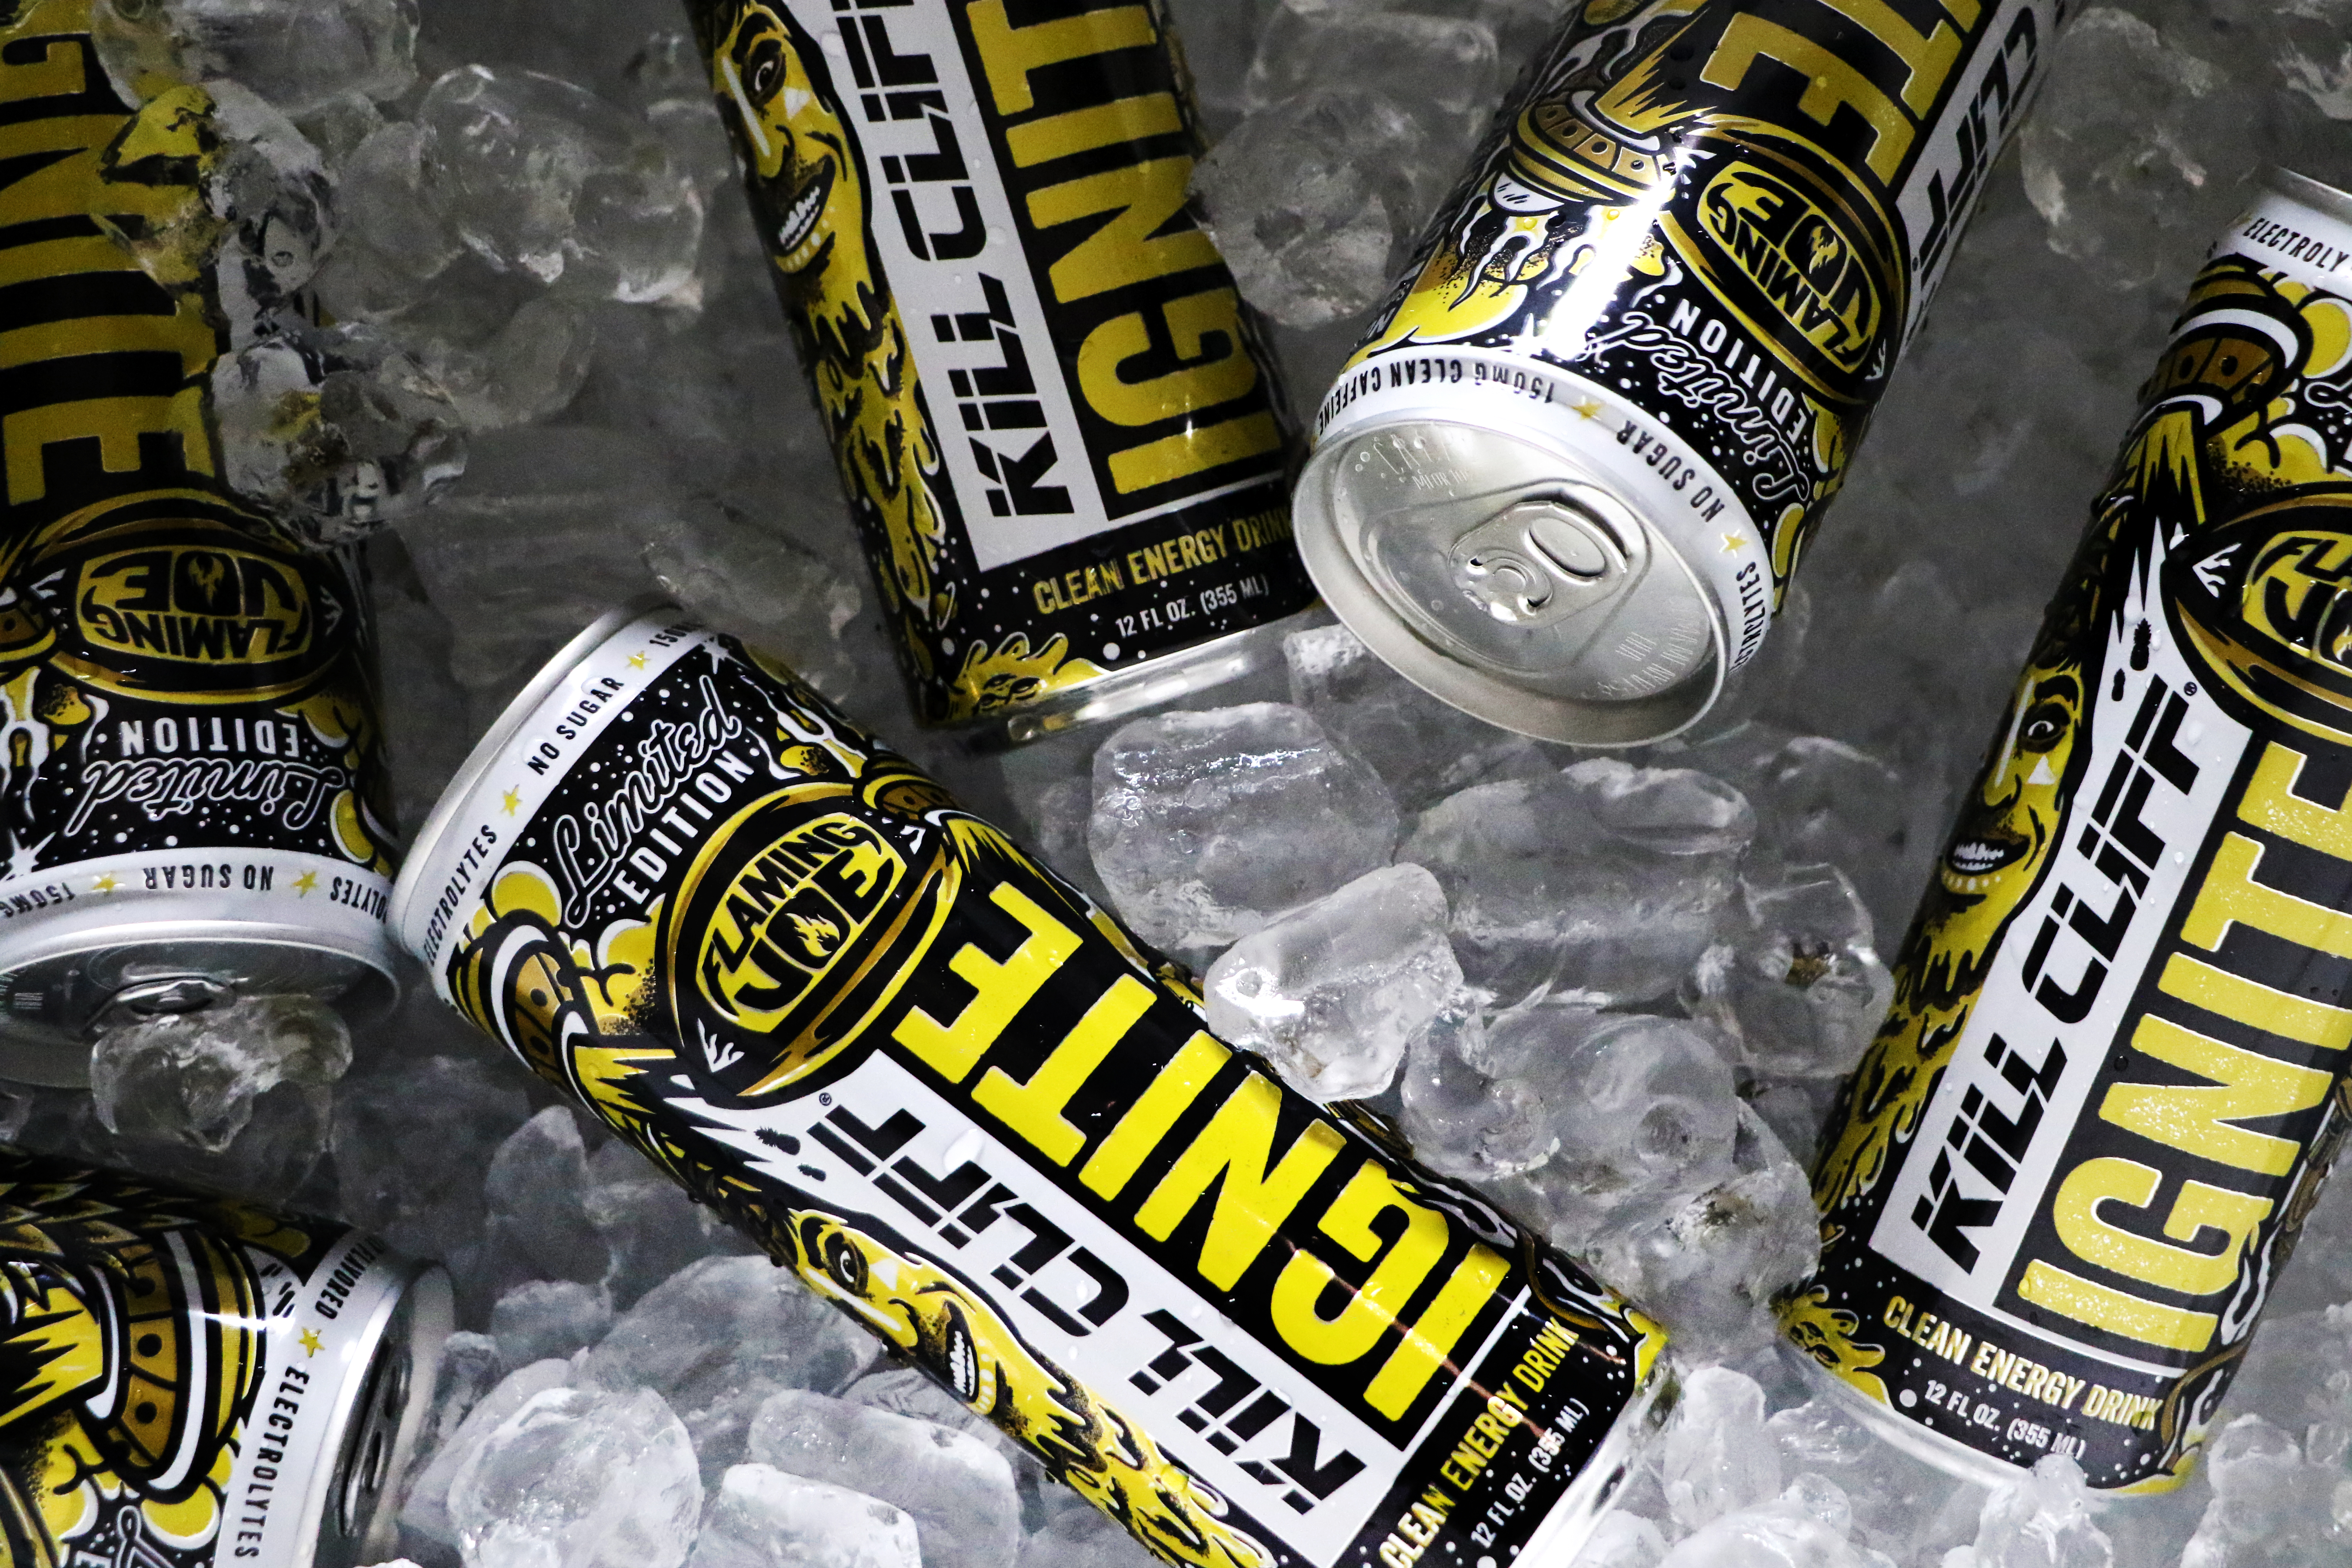 Cans of Kill Cliff energy drink on ice.